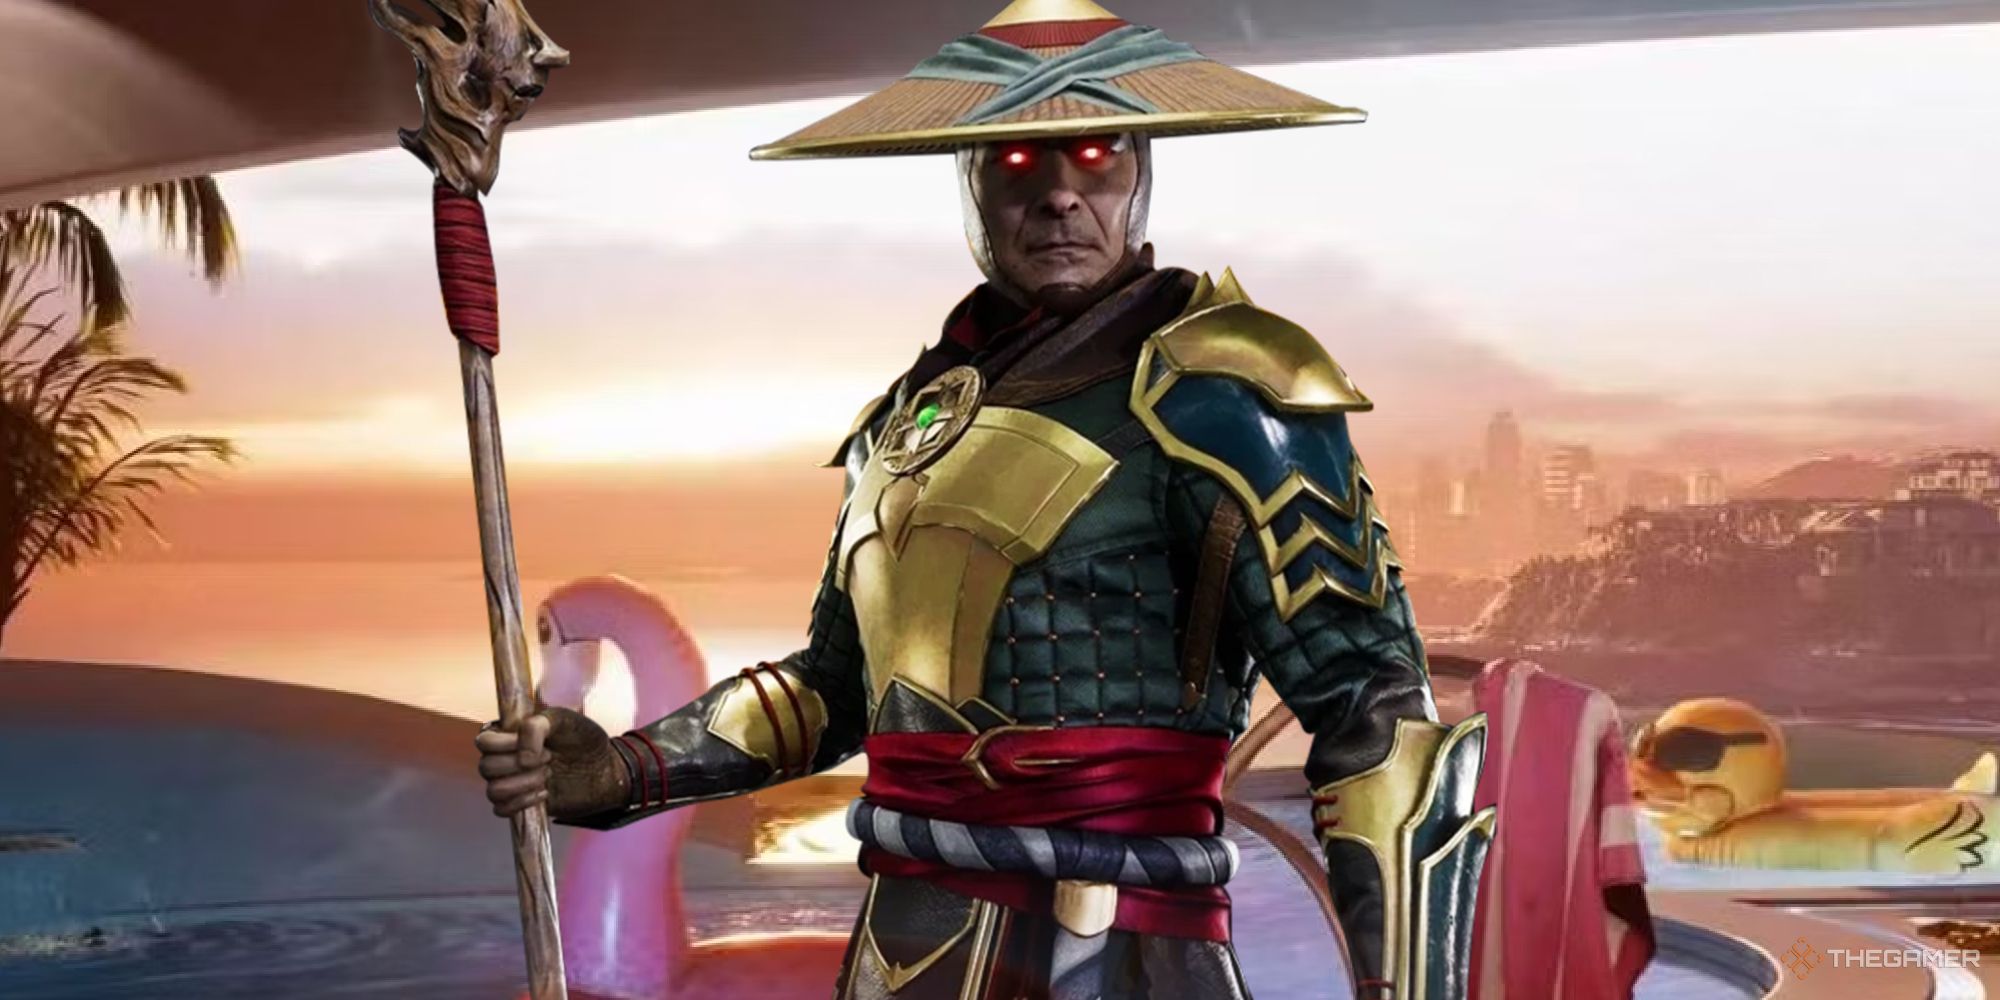 Another incredible classic skin is available in Mortal Kombat 1